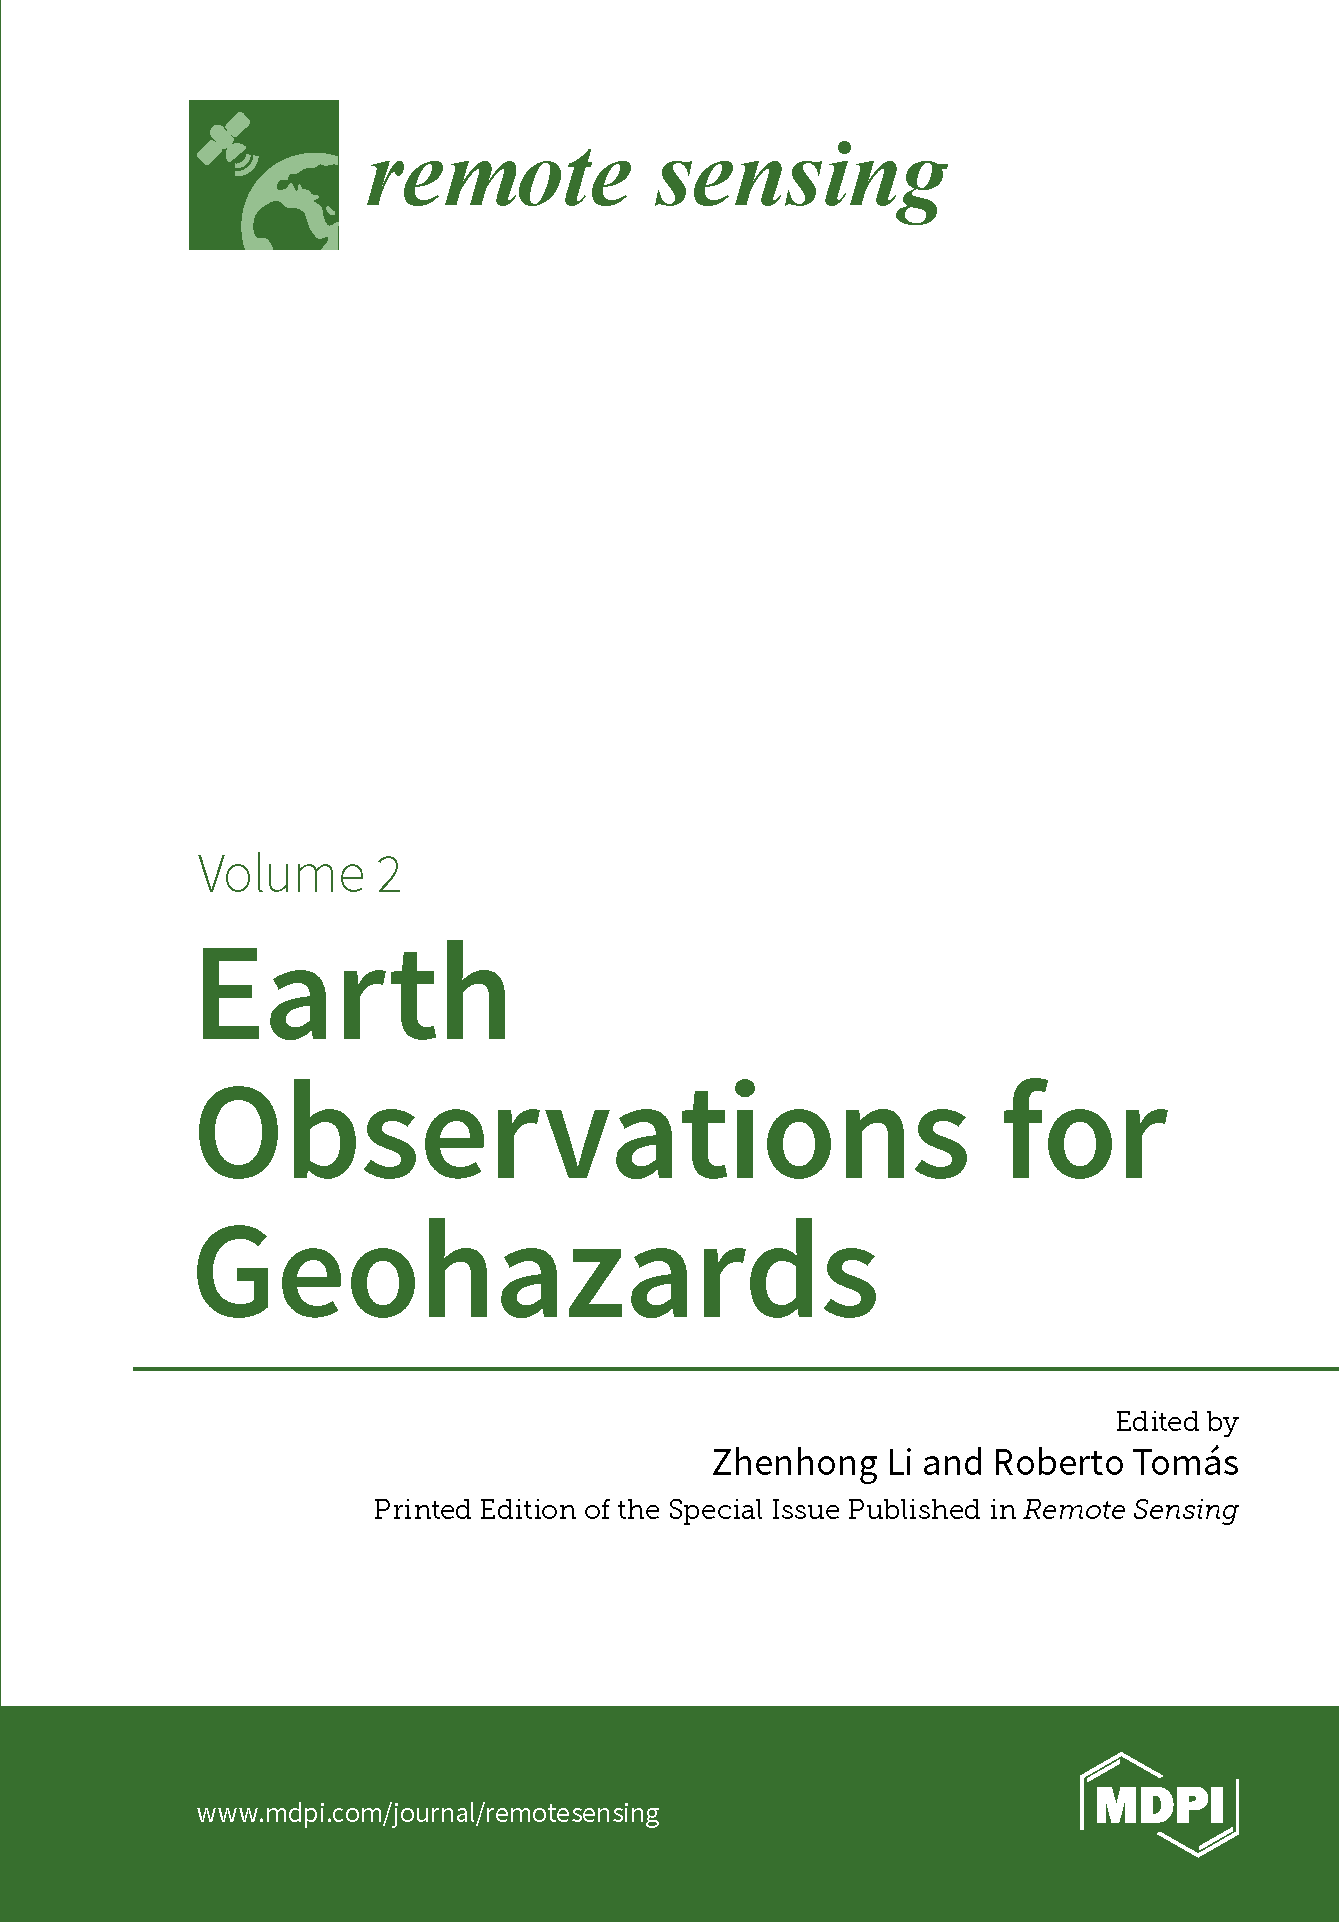 Earth Observations for Geohazards